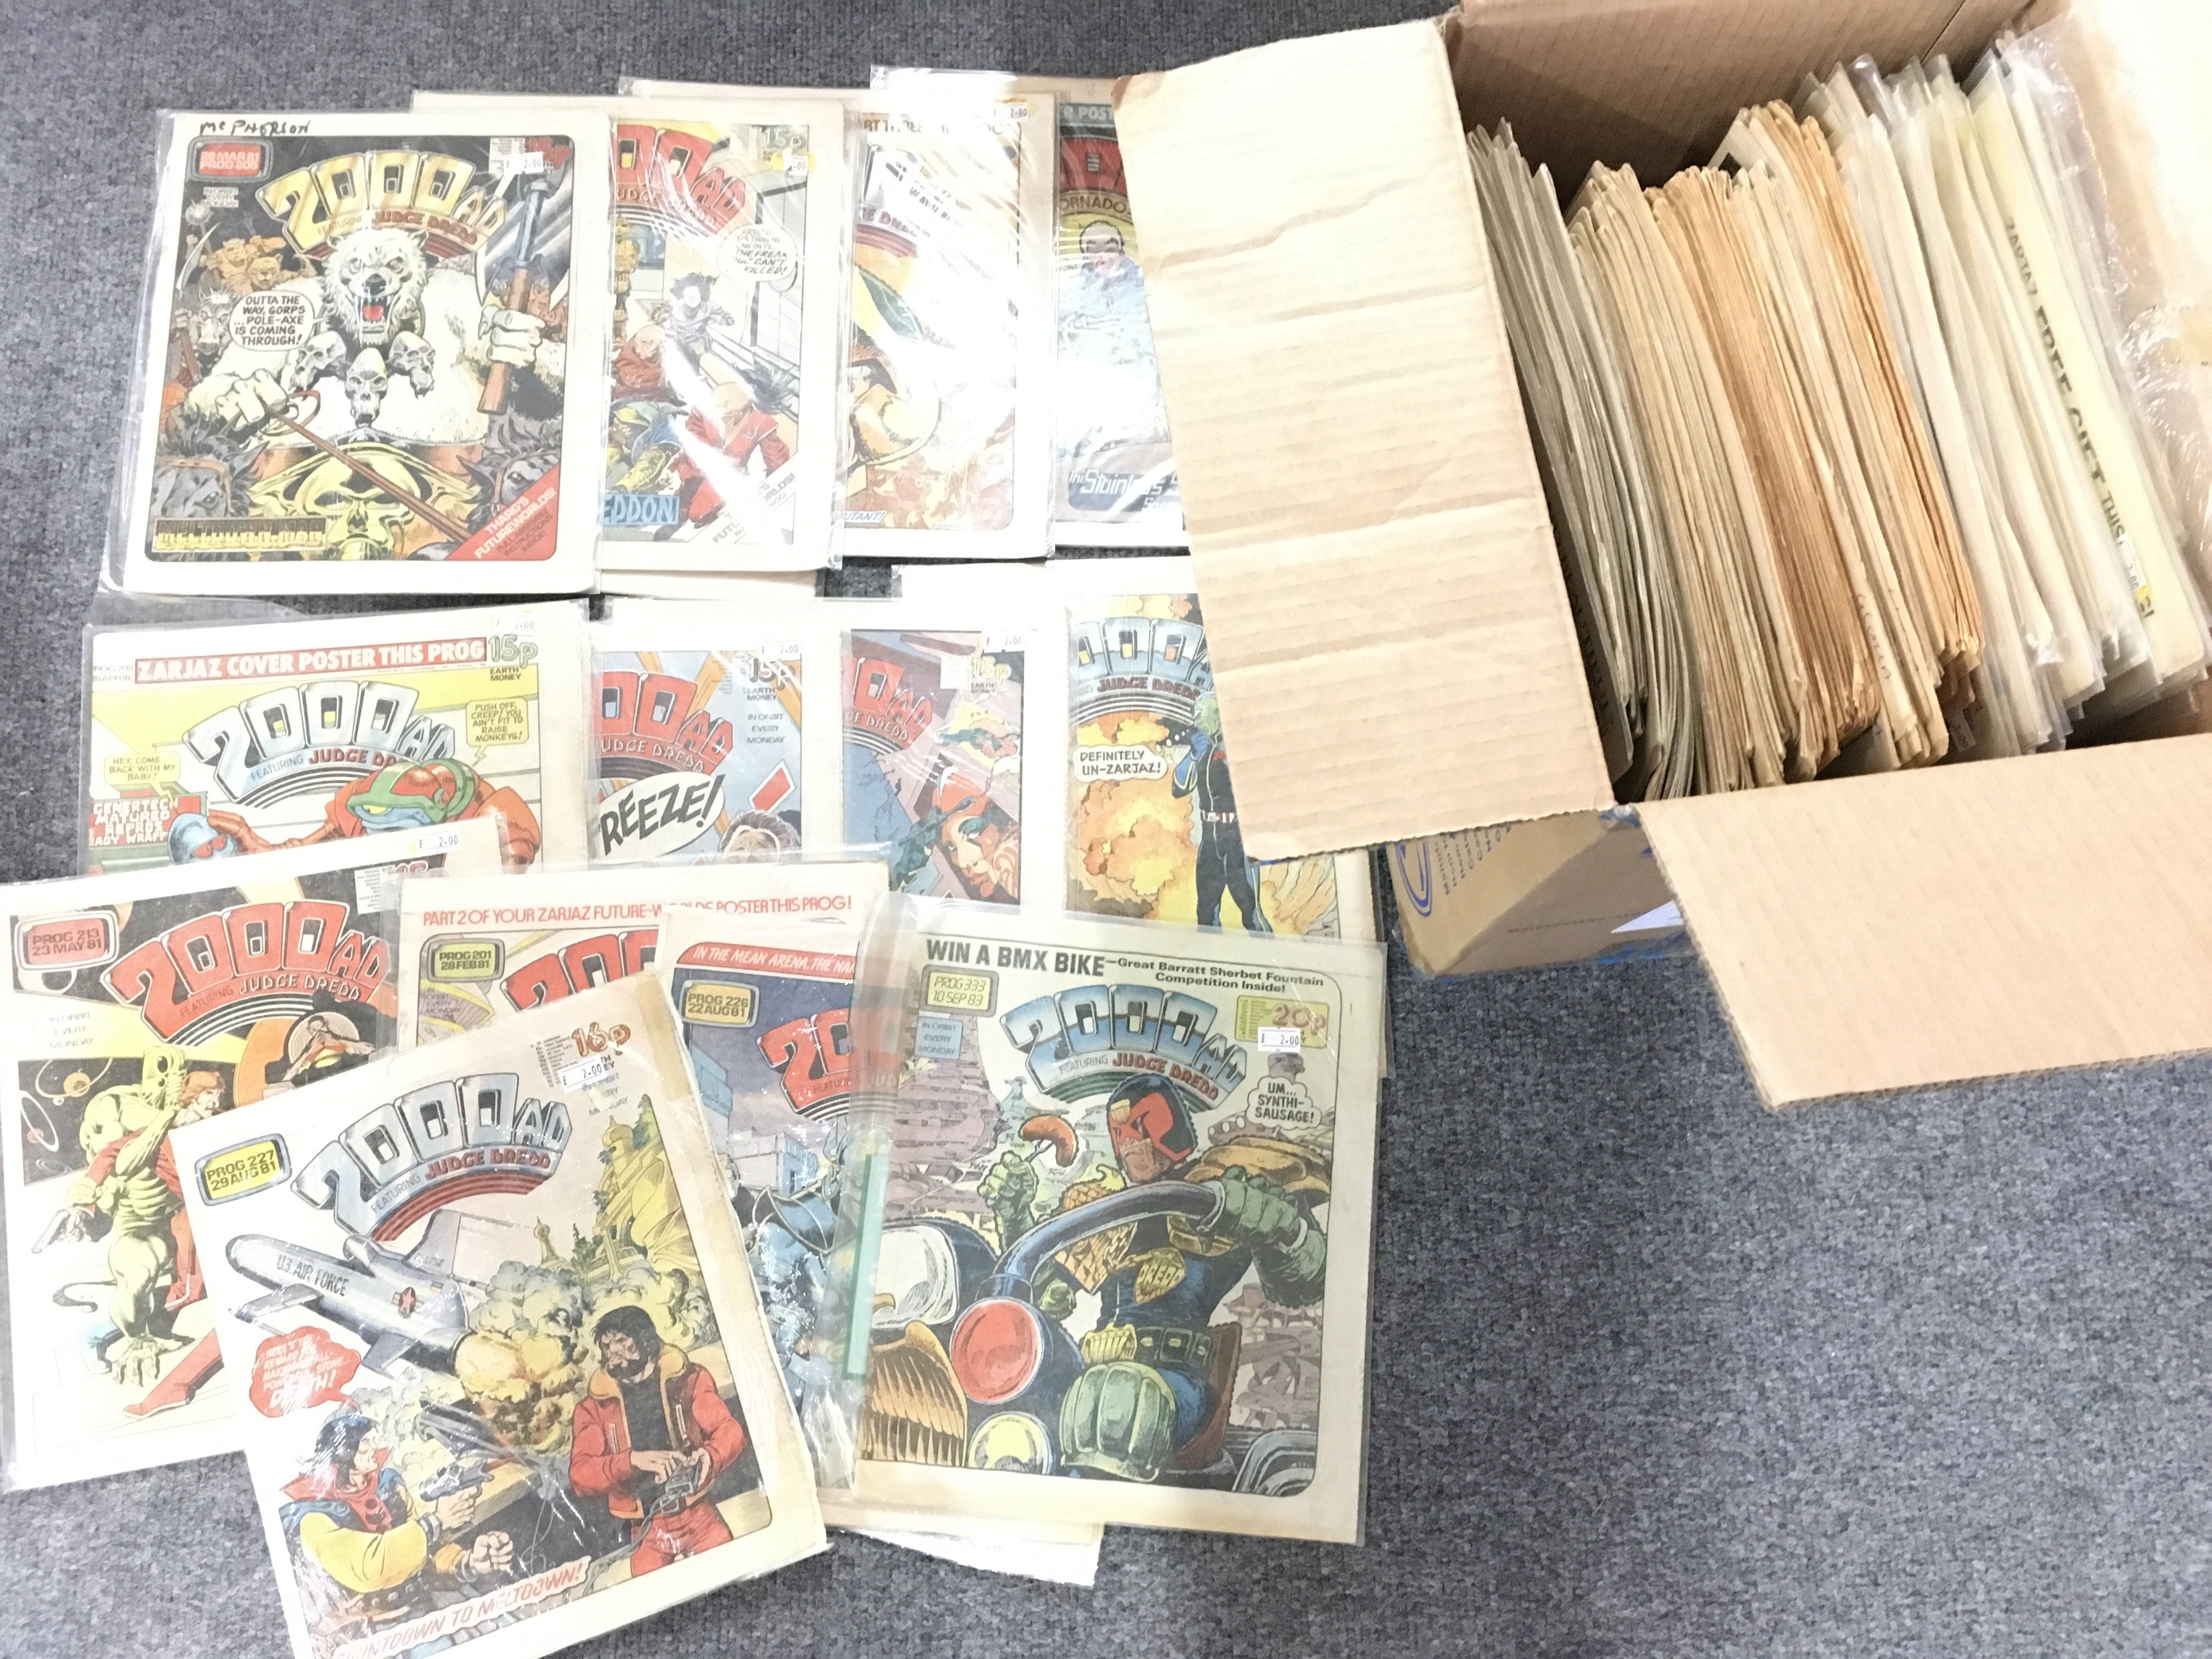 2 Boxes Containing A Collection of 2000 A.D Comics - Image 3 of 3